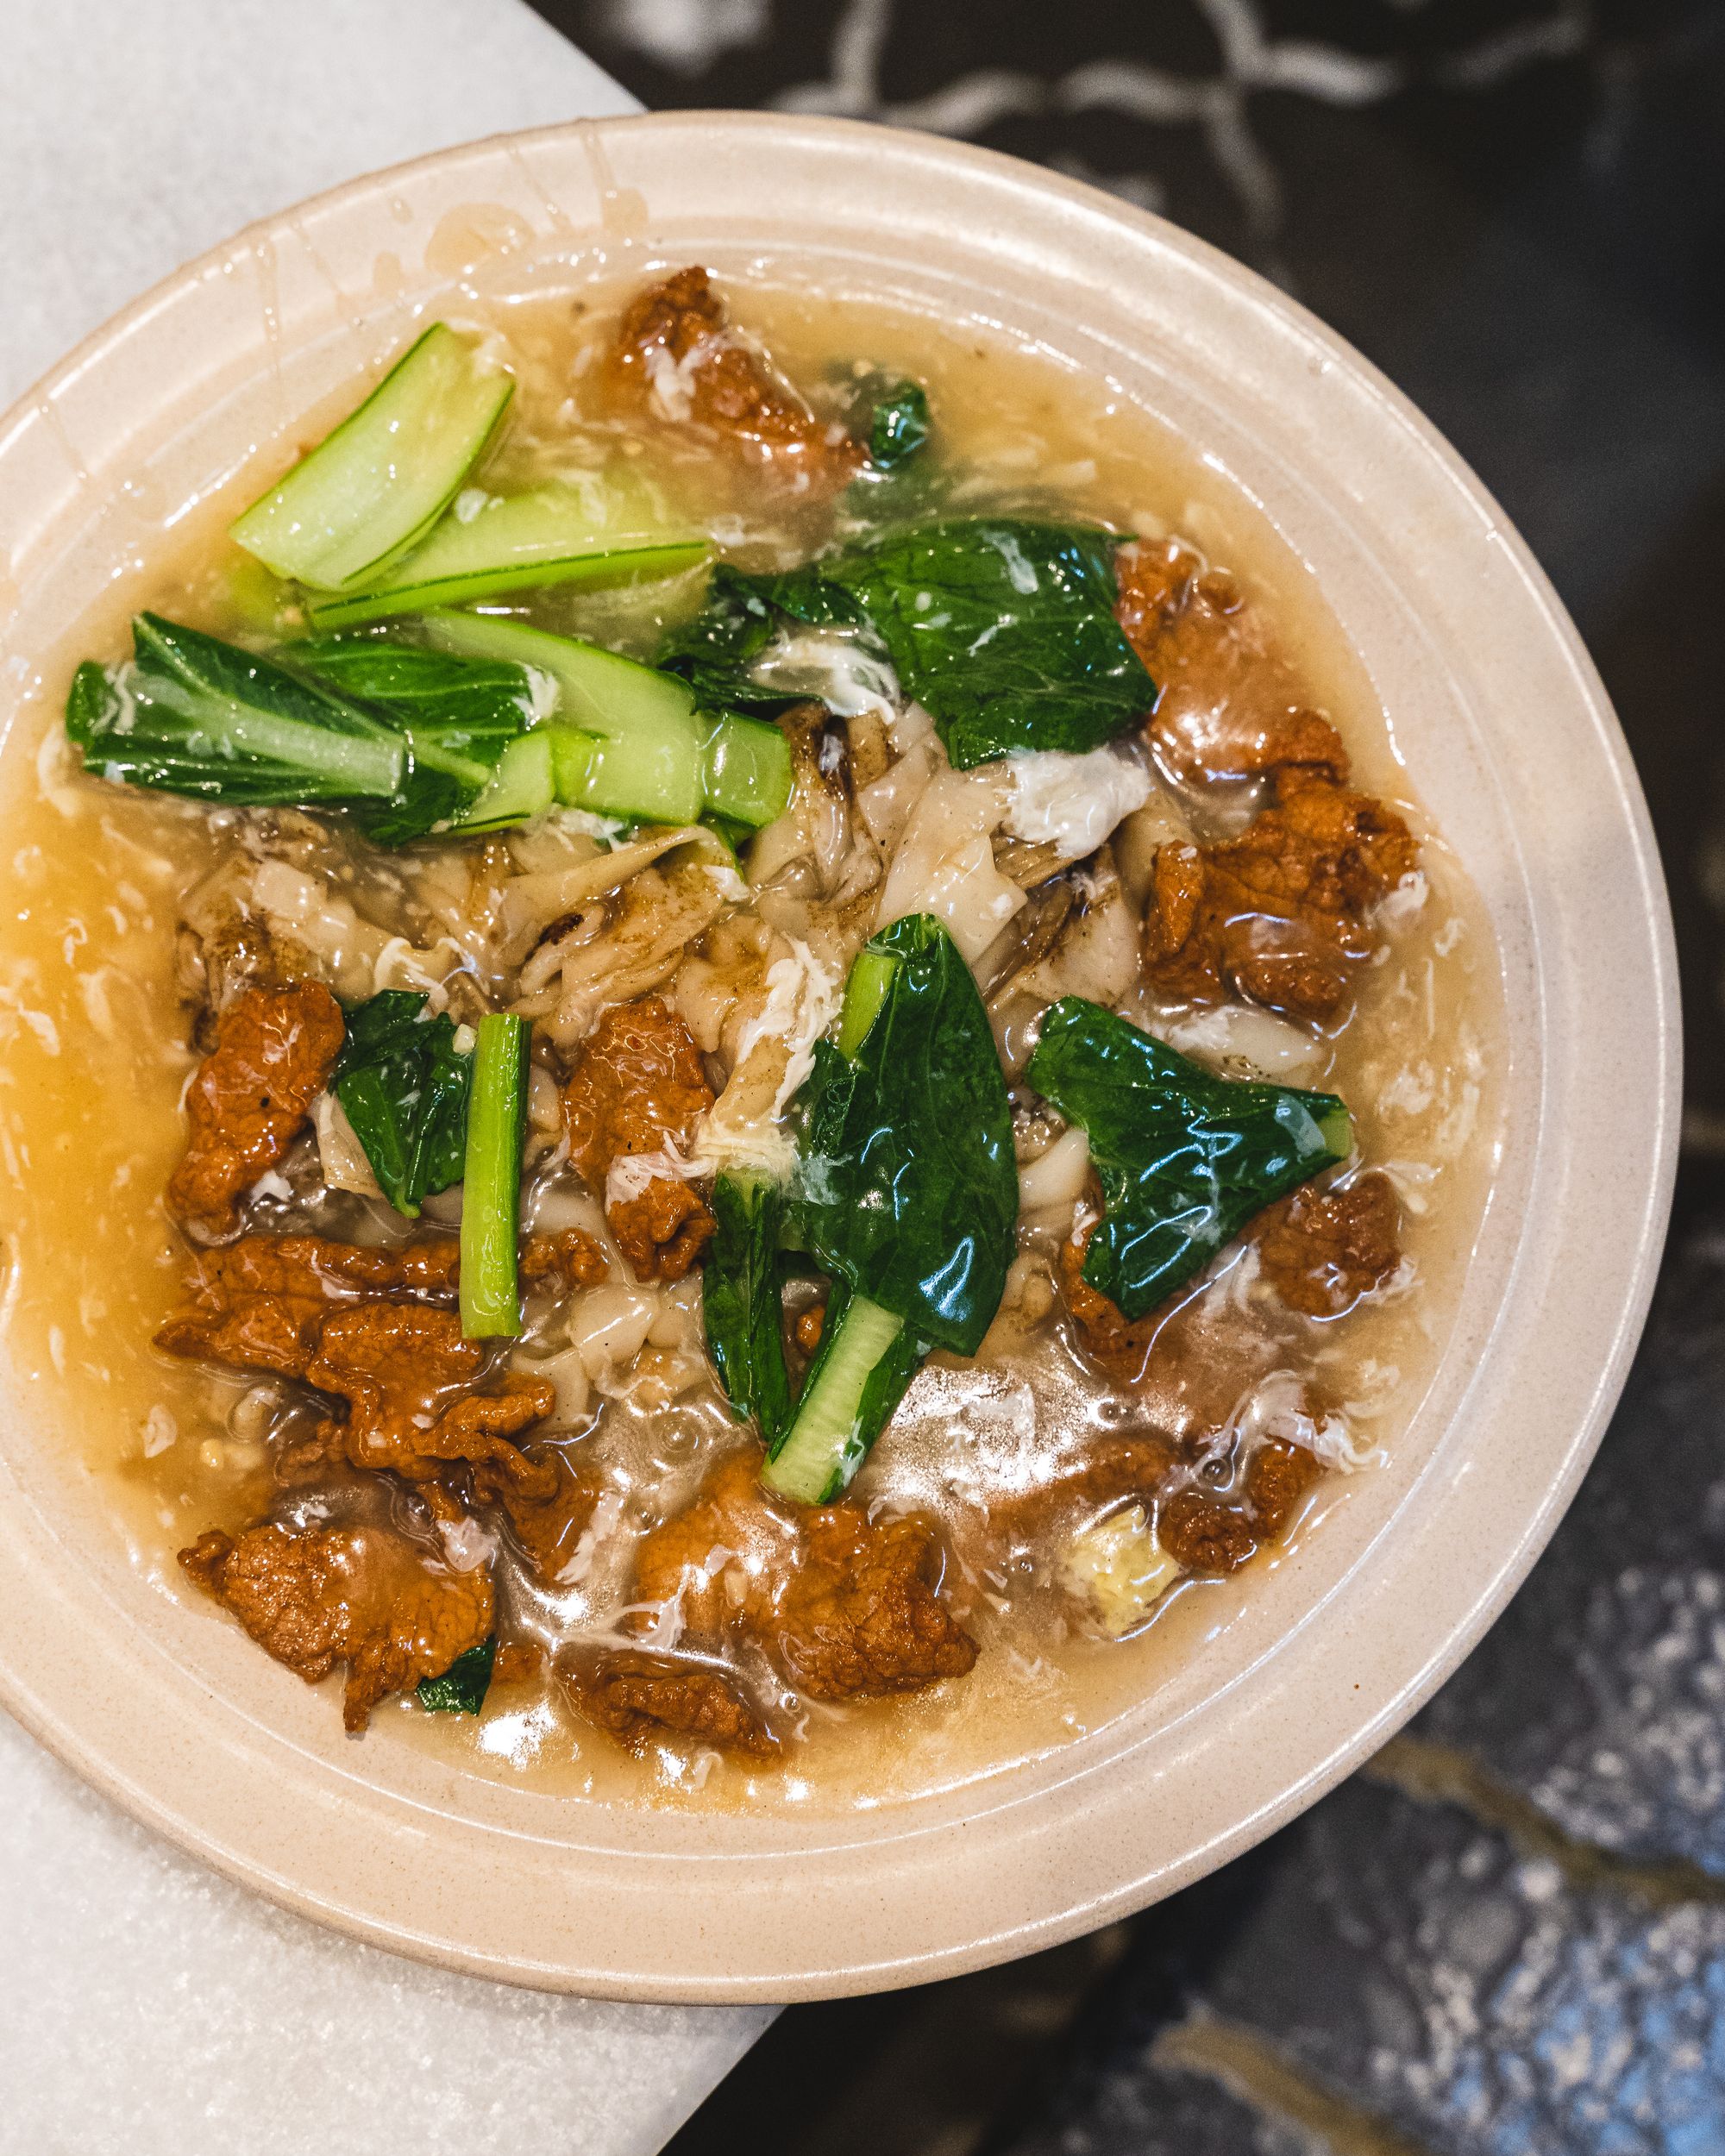 Hofun noodles in egg sauce with vegetables and beef